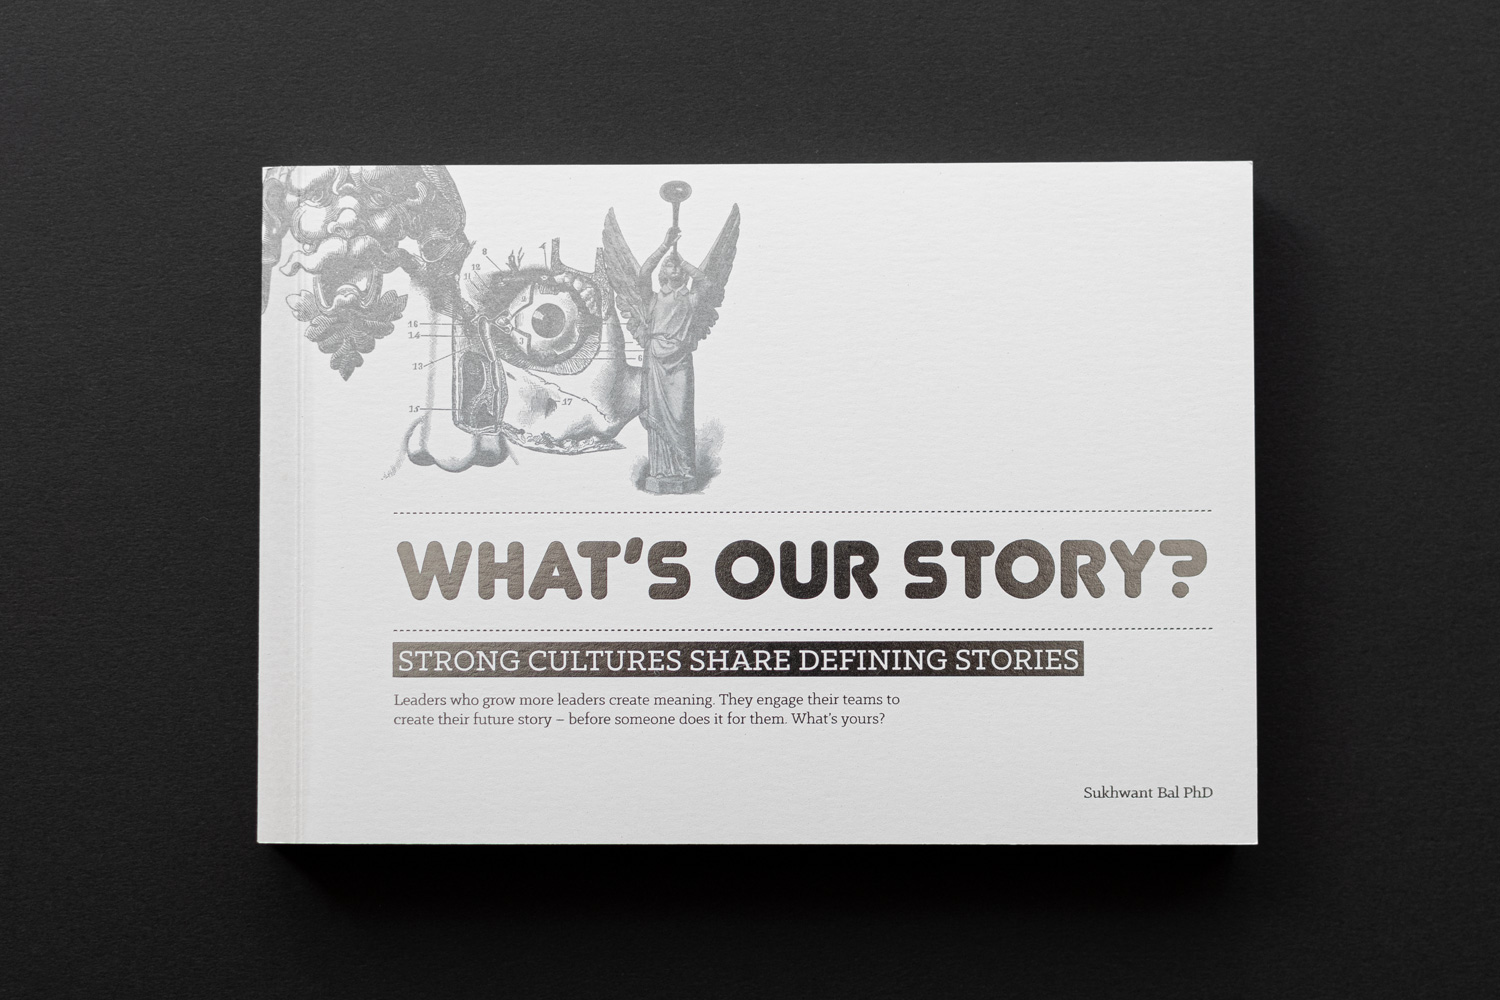 What's our story book cover design.